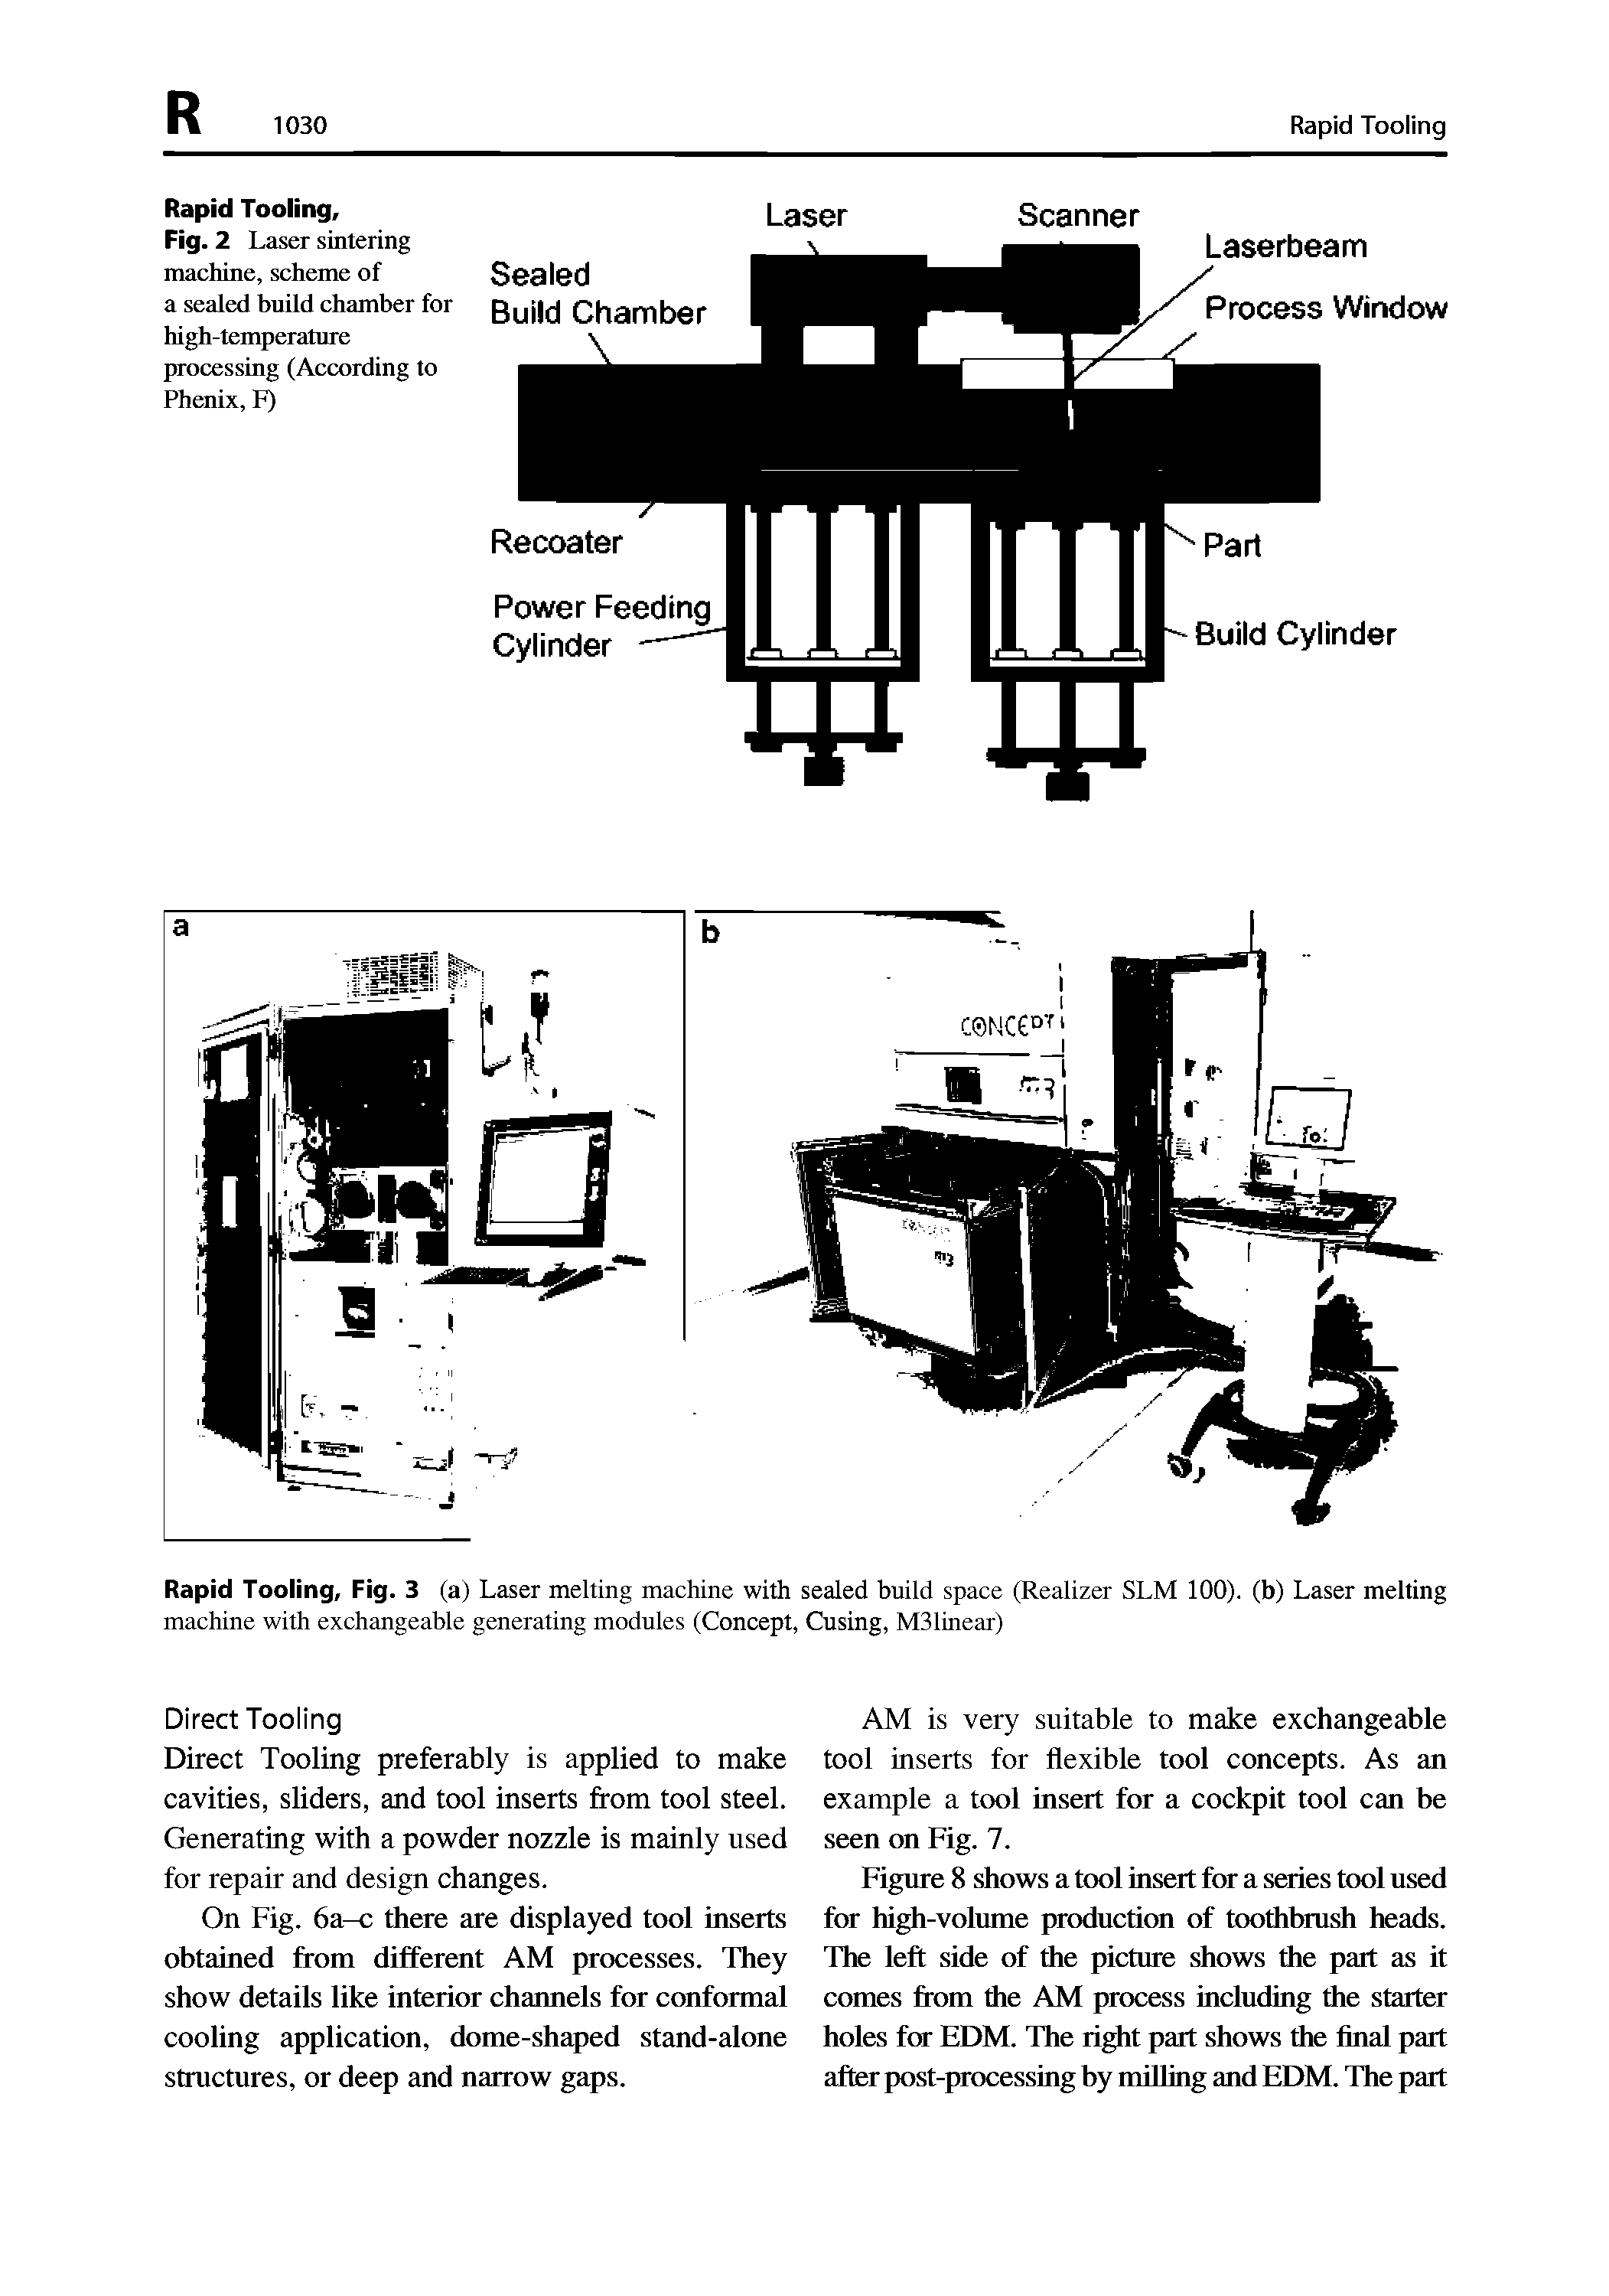 Fig. 2 Laser sintering machine, scheme of a sealed build chamber for high-temperature processing (According to Phenix, F)...